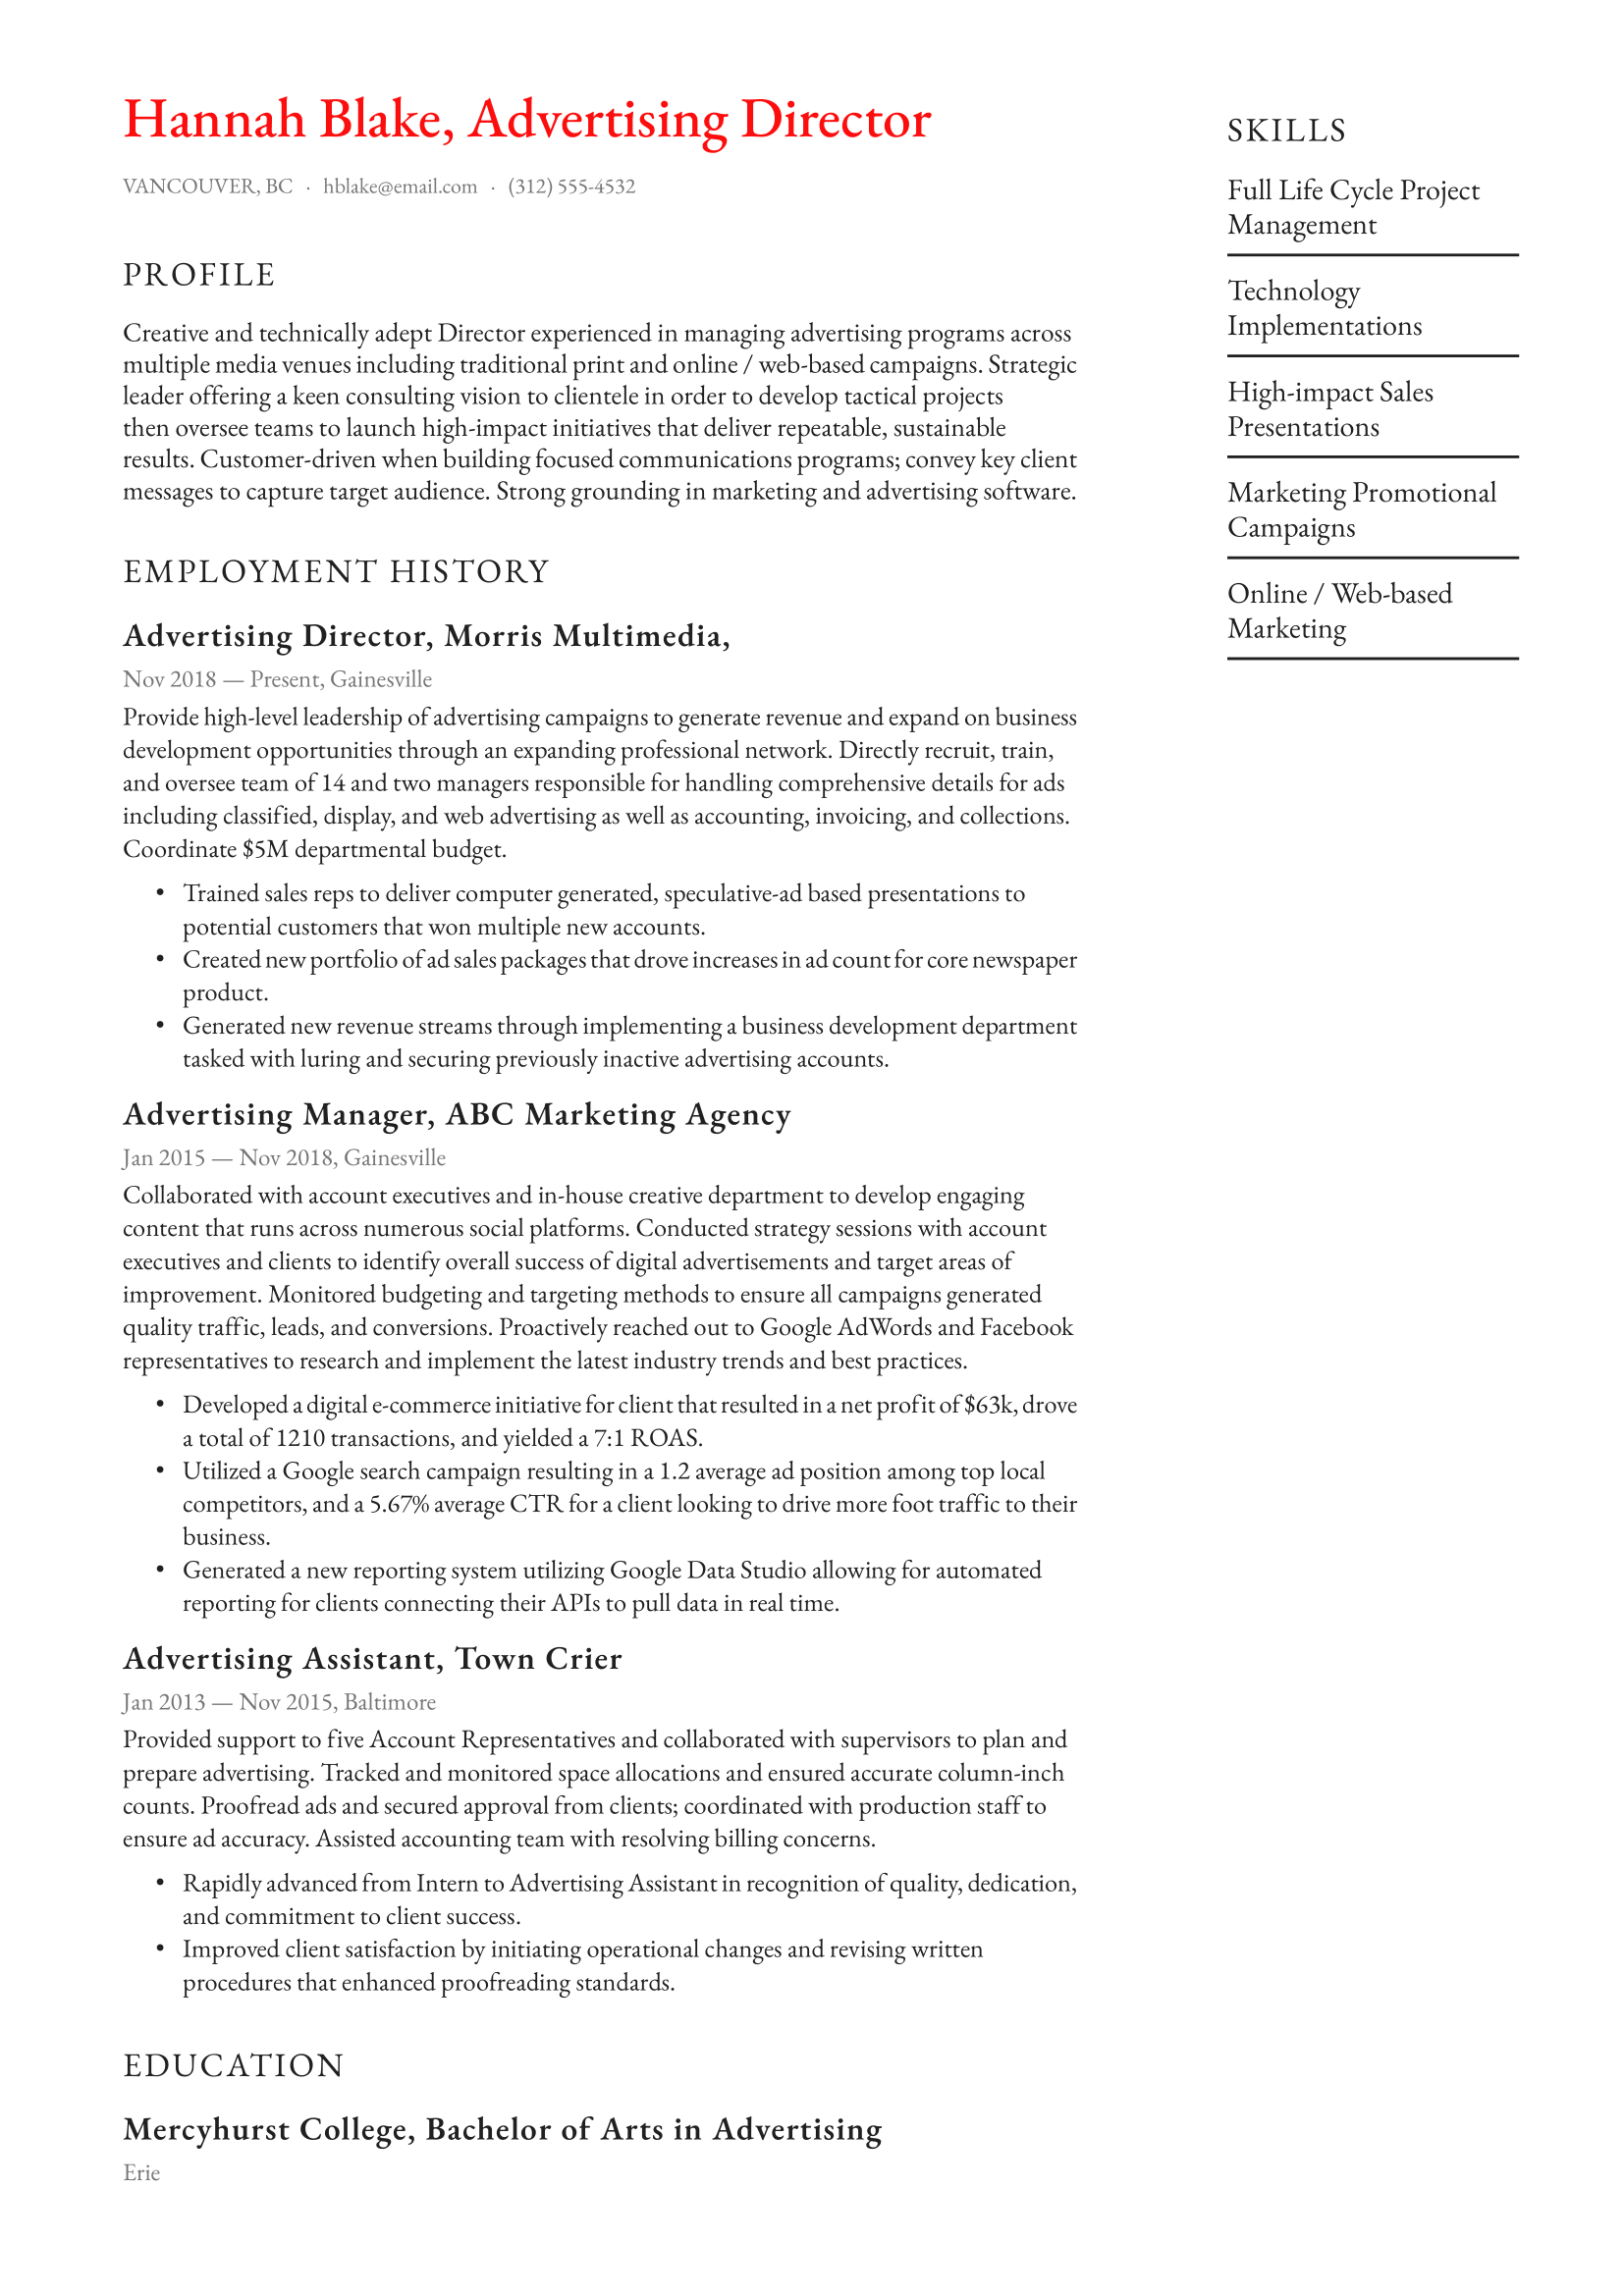 Advertising Resume Example & Writing Guide